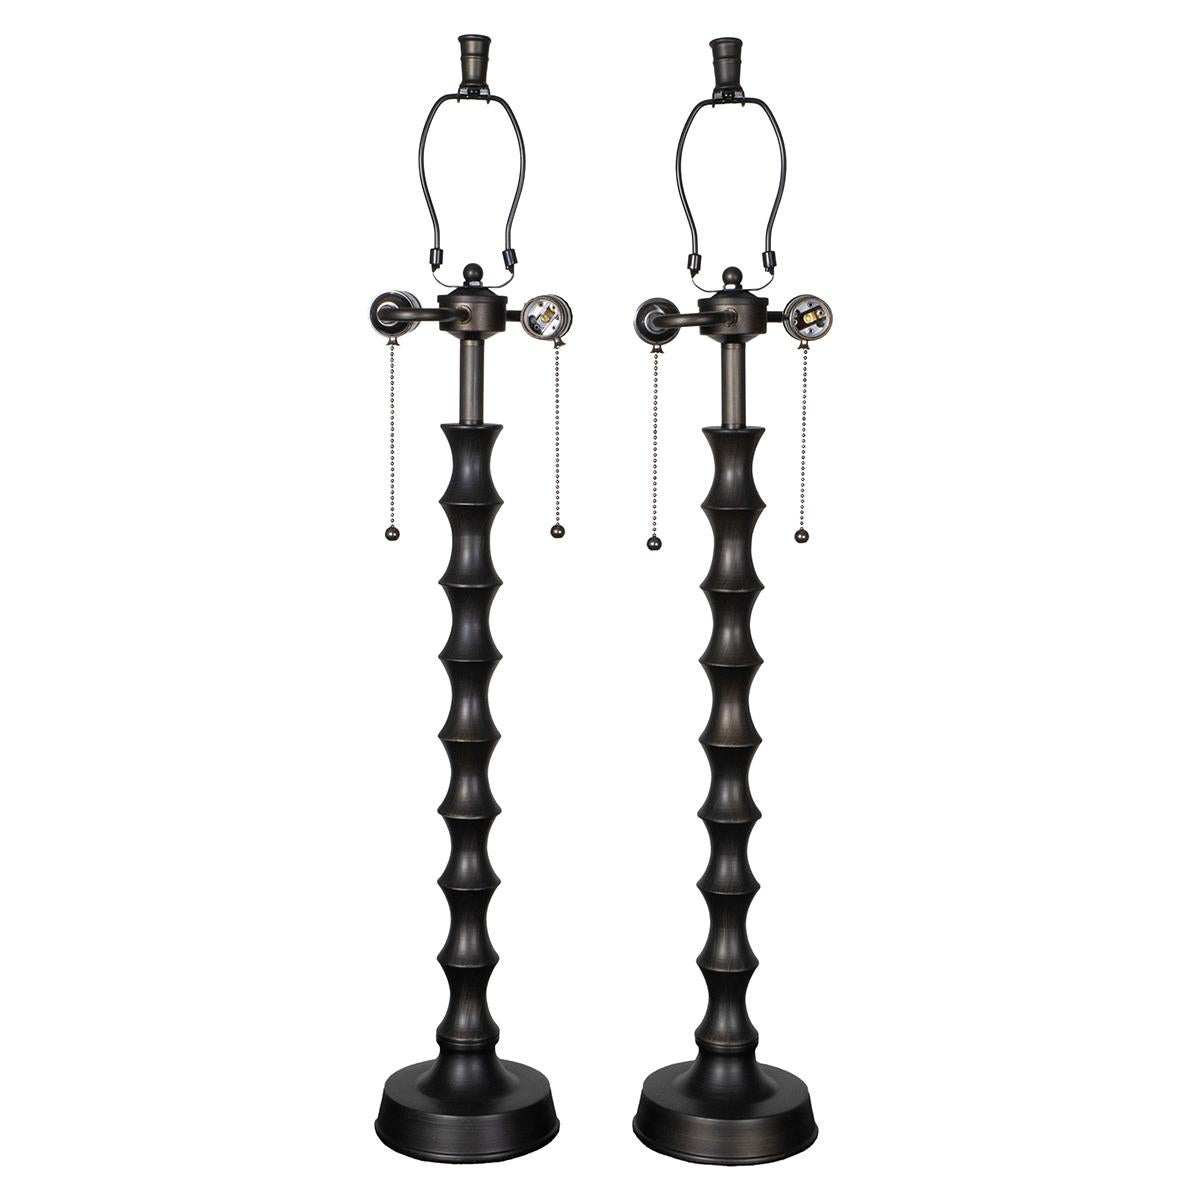 Pair of dark bronze finish, turned metal faux bamboo table lamps.